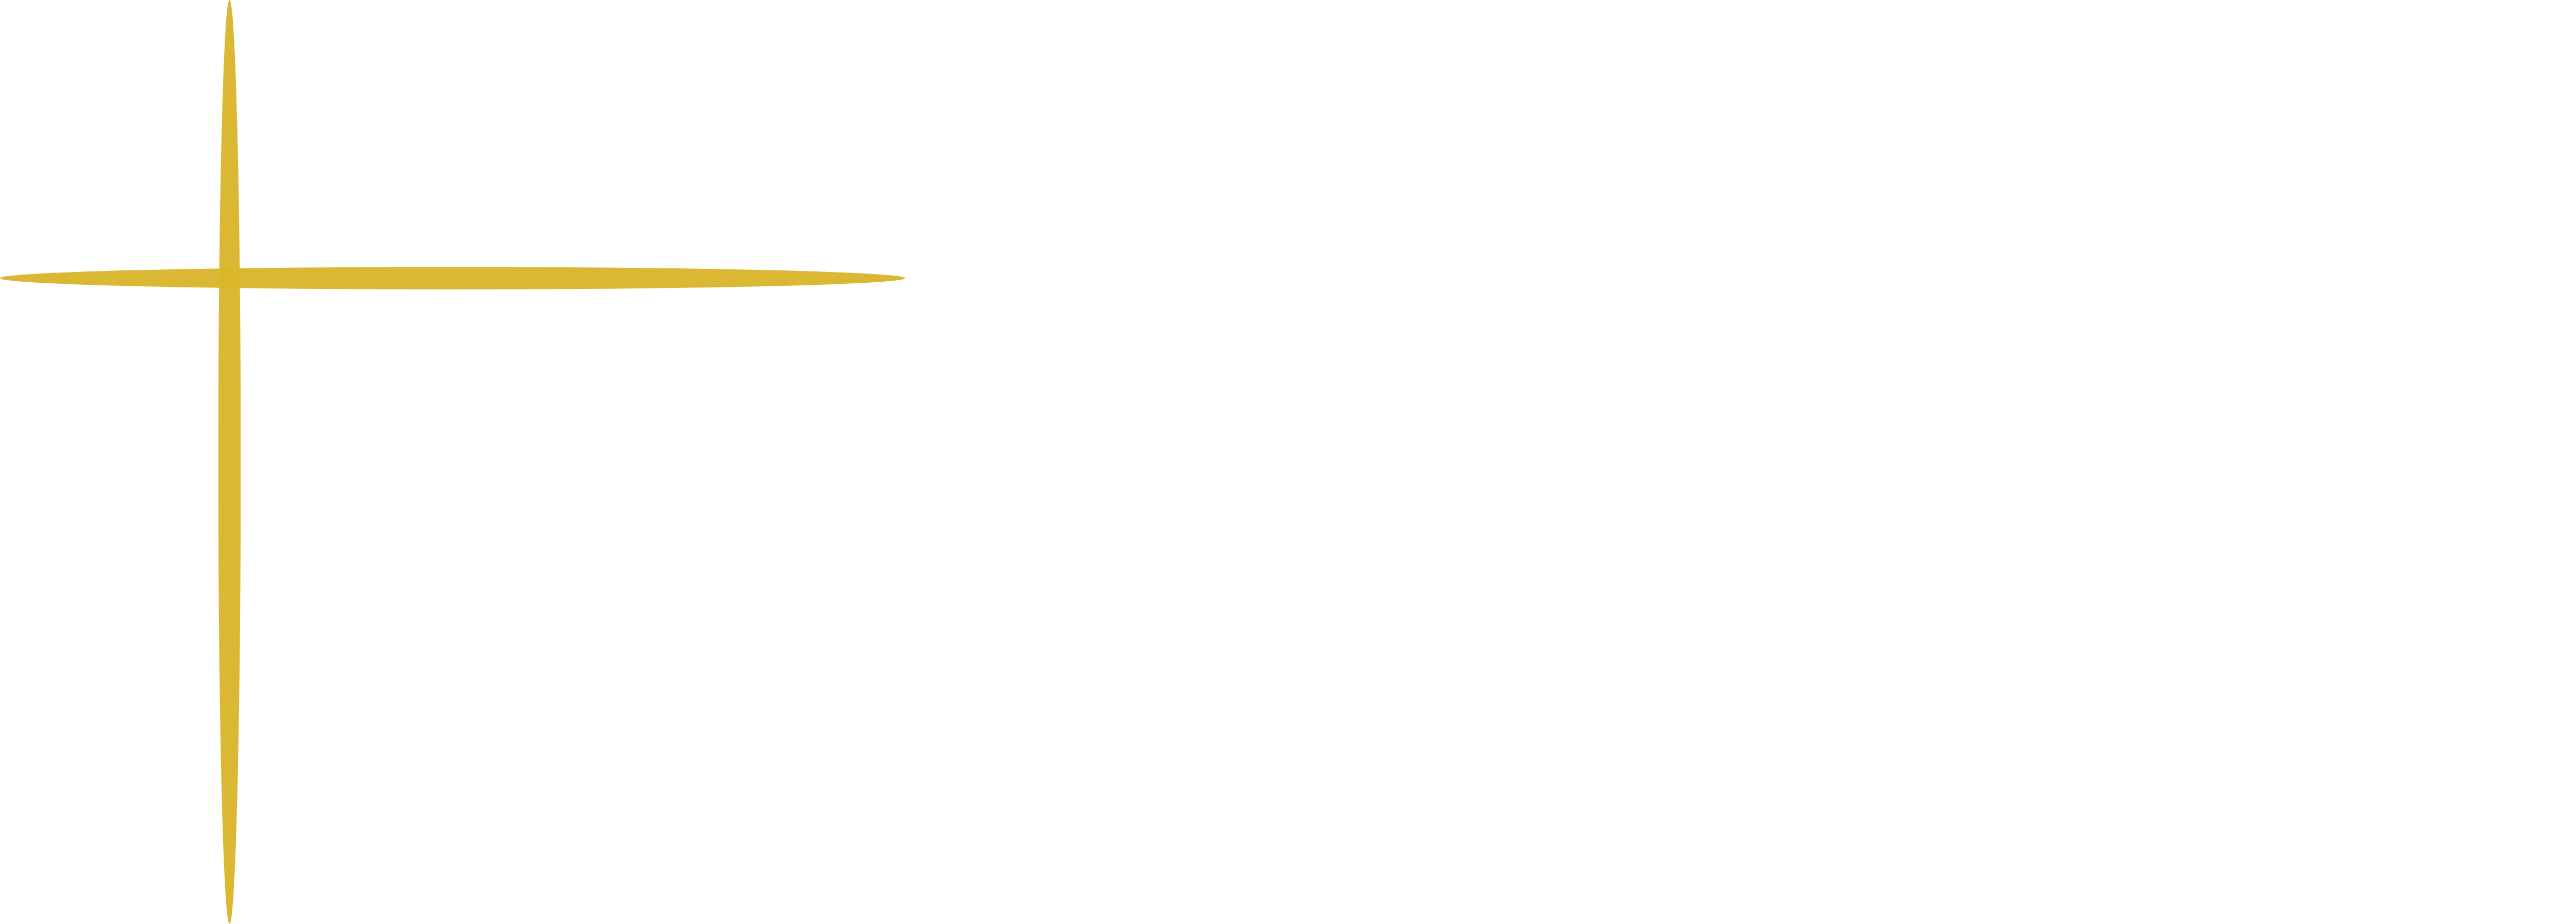 Professional Franchise Solutions